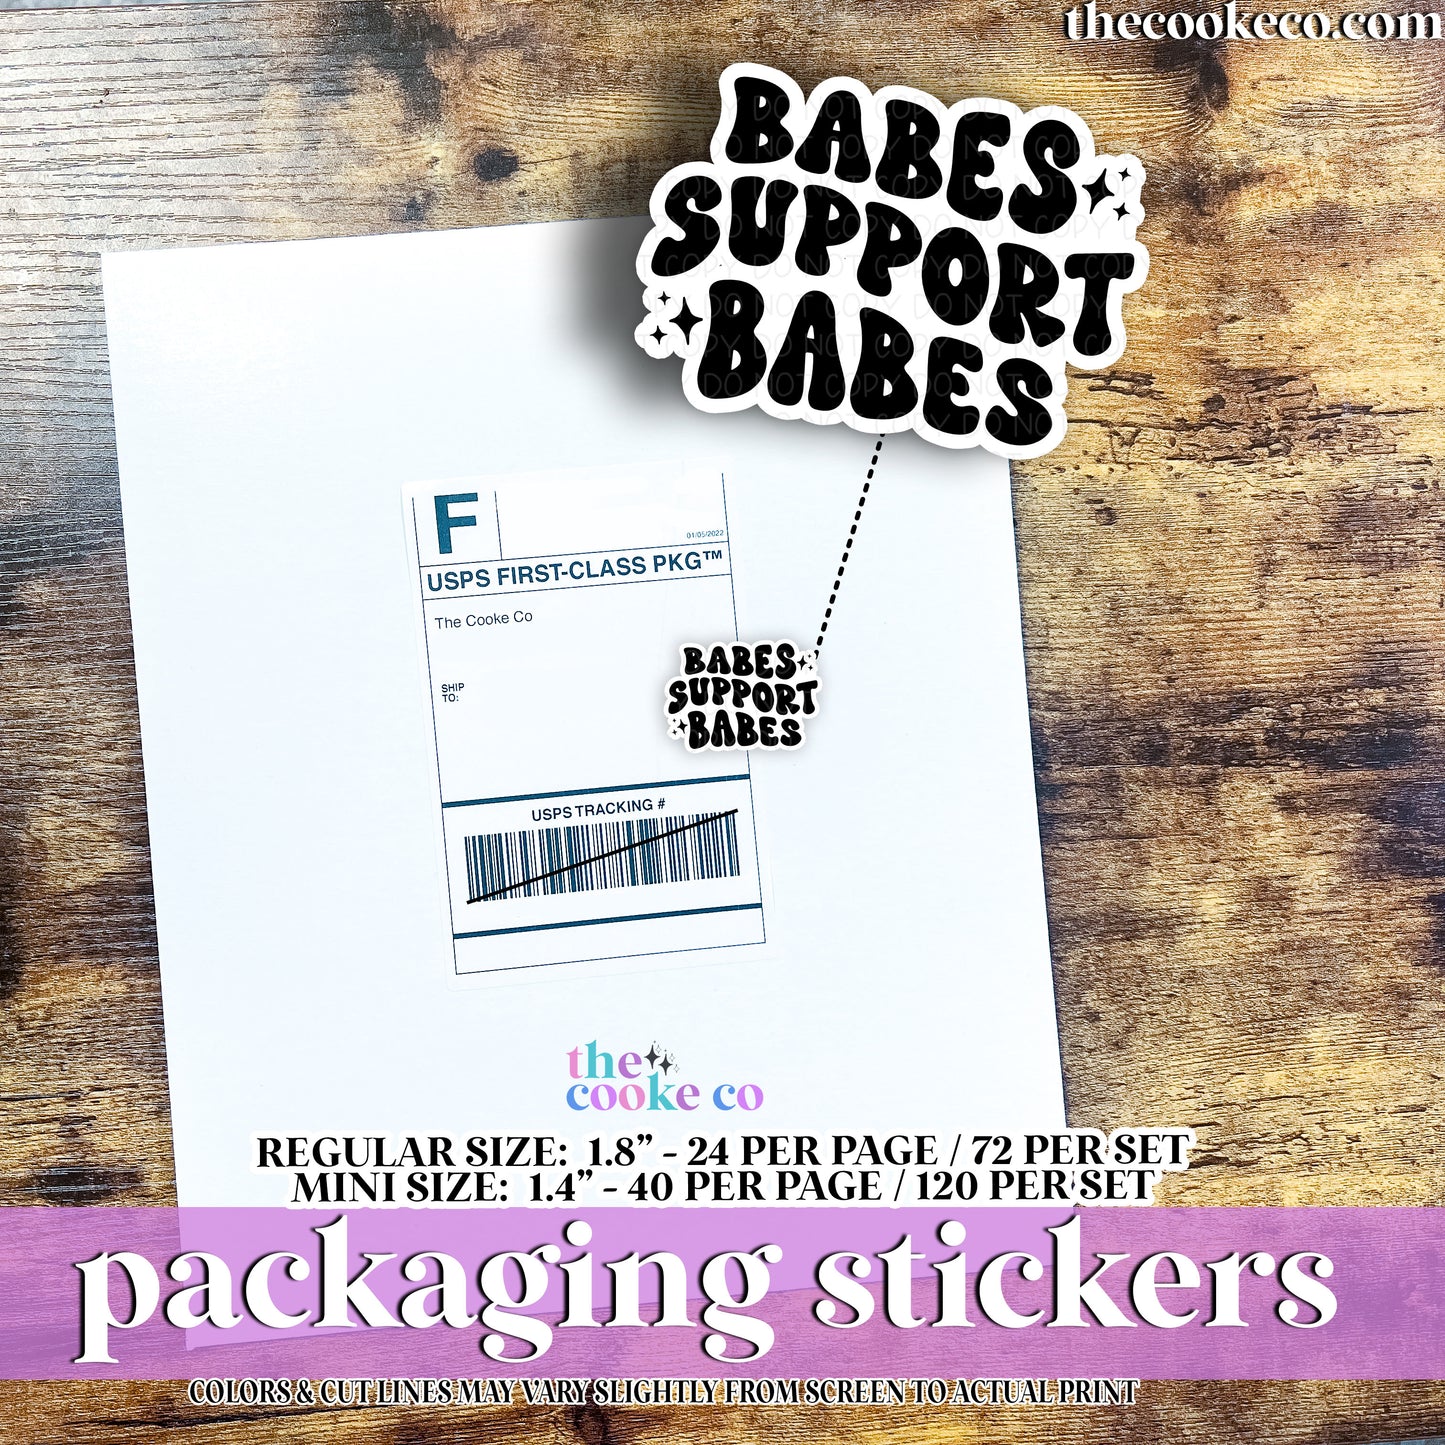 Packaging Stickers | #BW0237 - BABES SUPPORT BABES